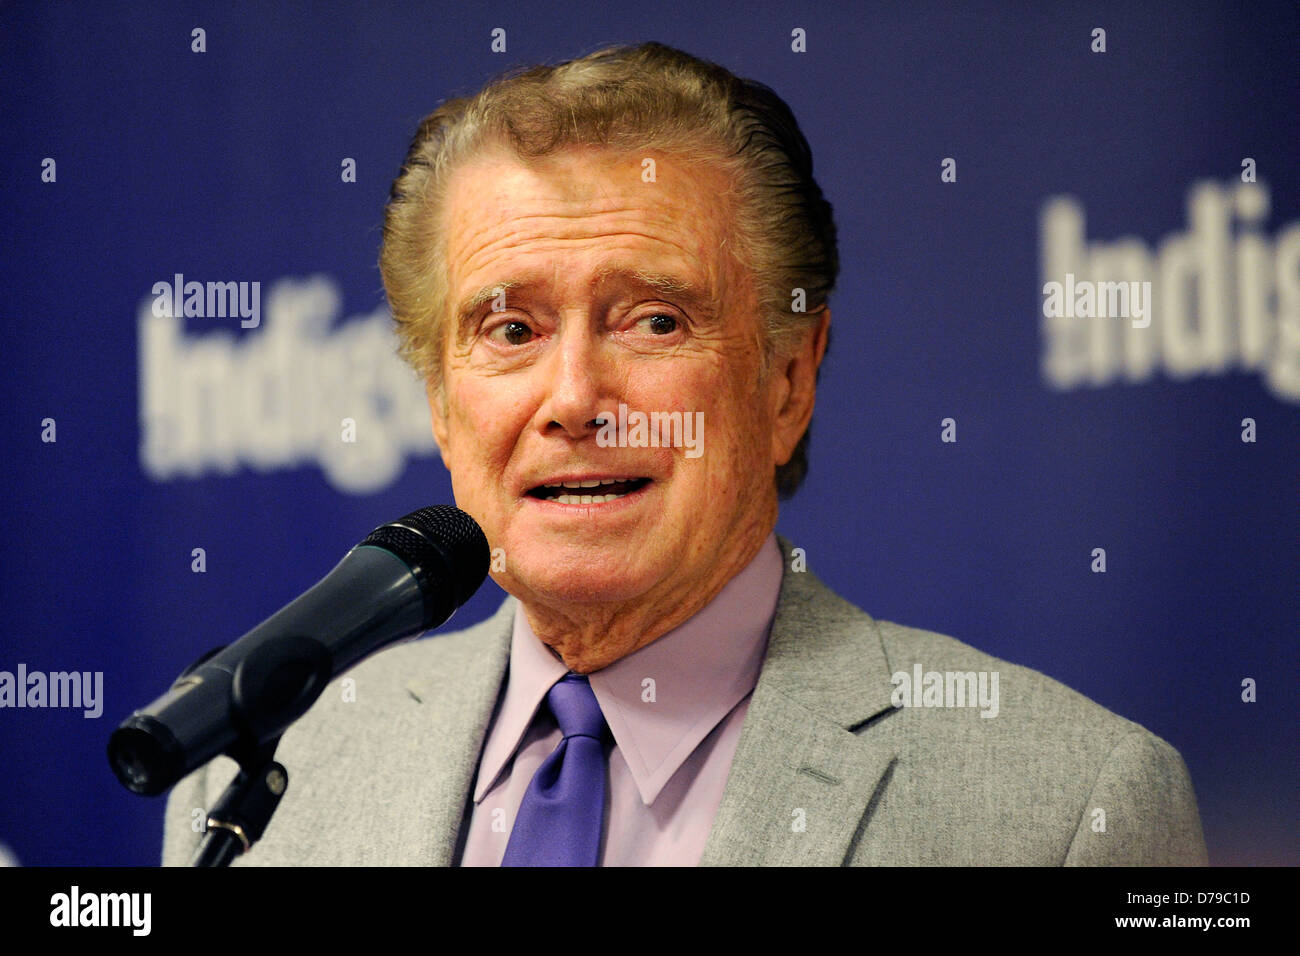 Regis Philbin at the Indigo Bookstore in Manulife Centre to sign copies of his new memoir 'How I Got This Way'. Toronto, Canada Stock Photo